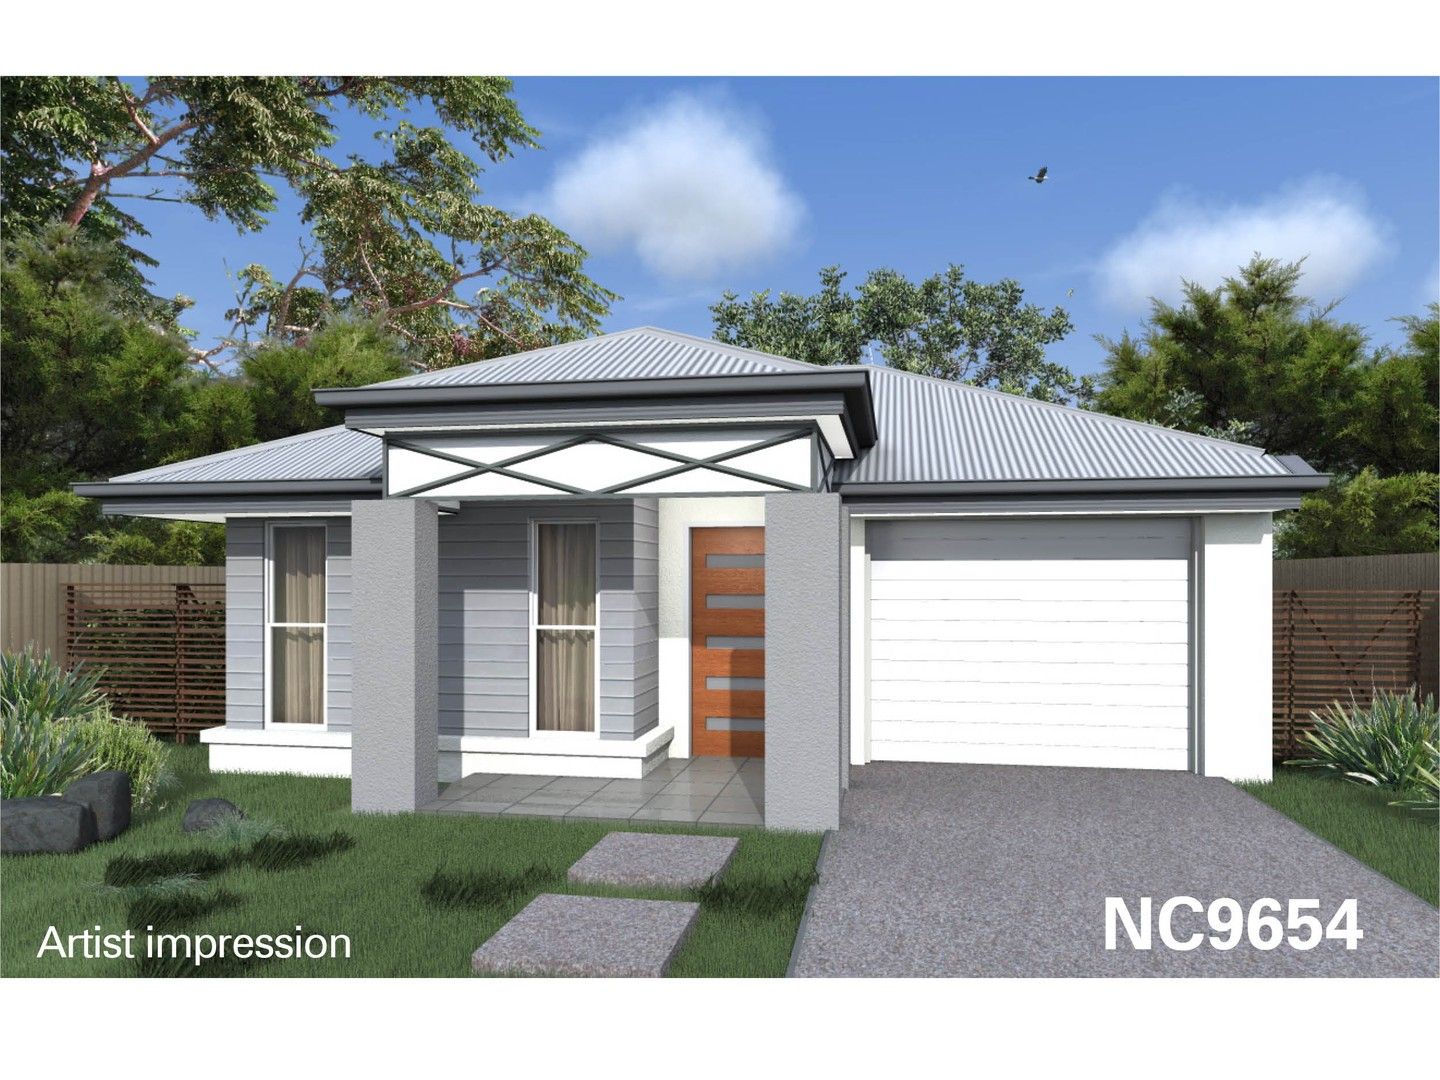 3 bedrooms New House & Land in 6 Rob St NEWTOWN QLD, 4350